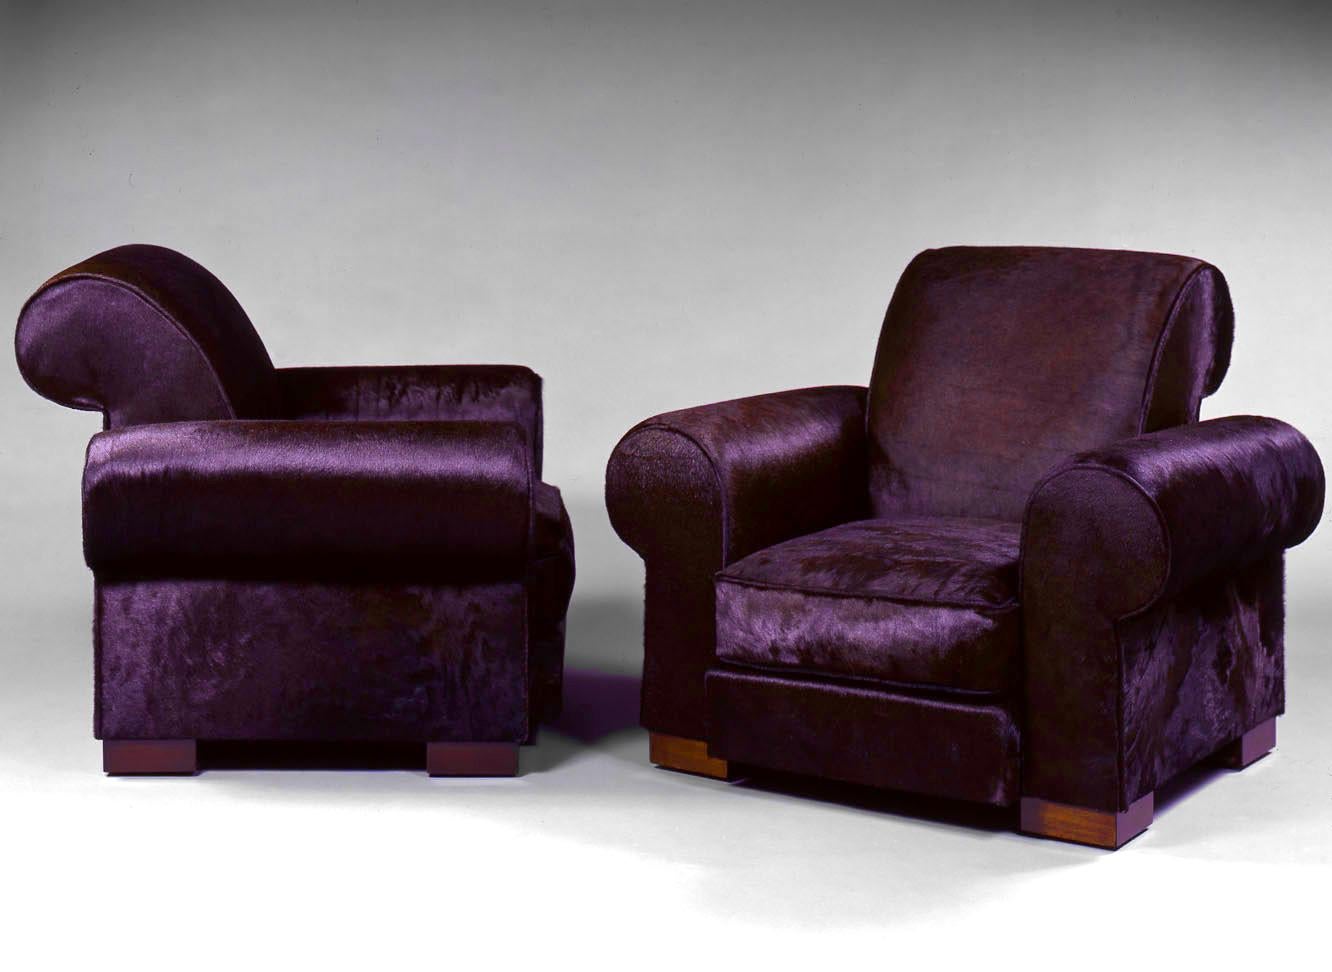 French Marc du Plantier, Rare Pair of Comfortable Armchairs, circa 1936 For Sale